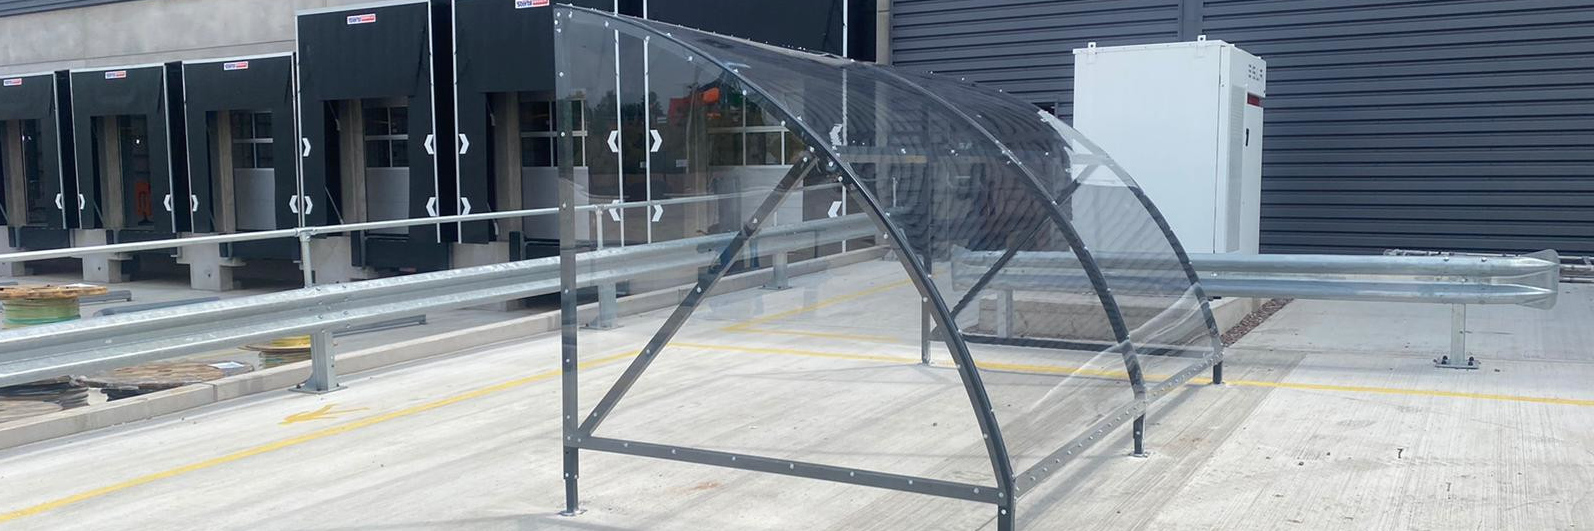 Image of a shelter store shelter in a car park